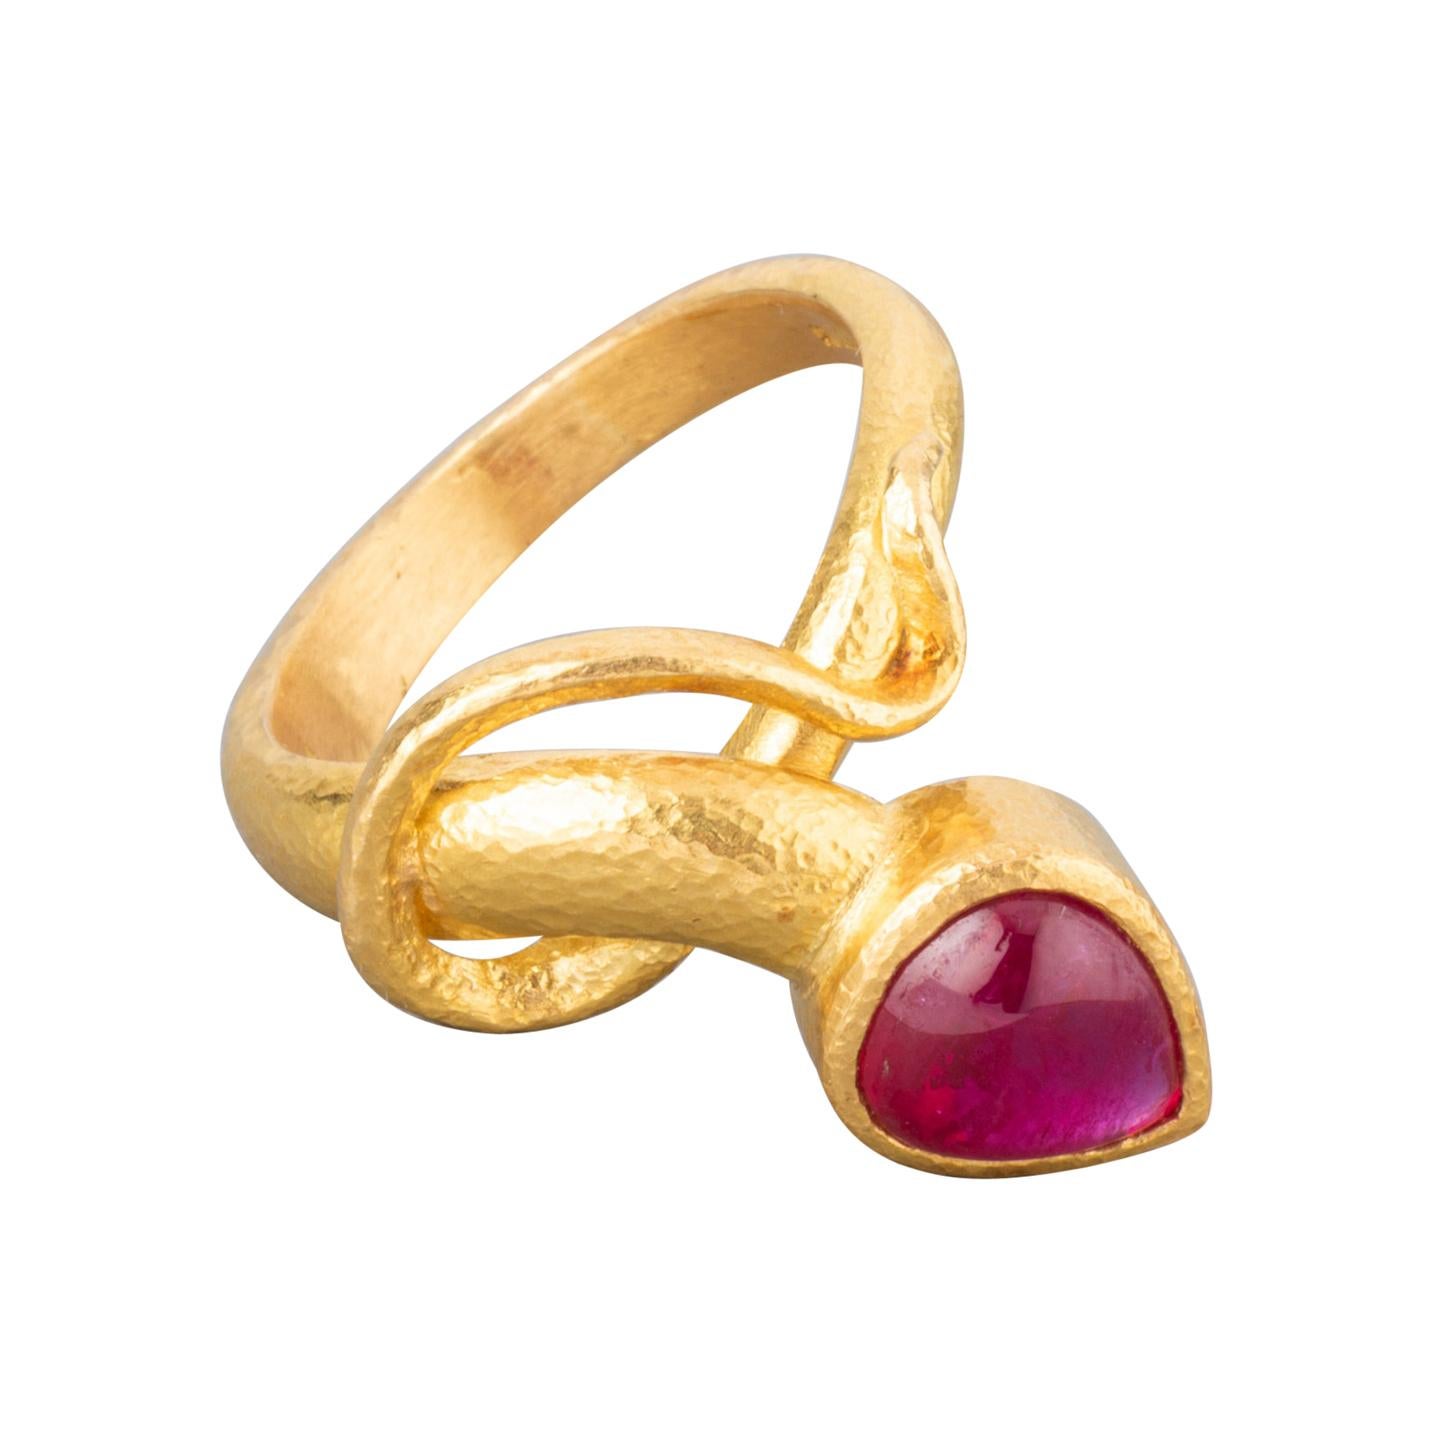 Gold and Ruby French Ring by Bernardeau